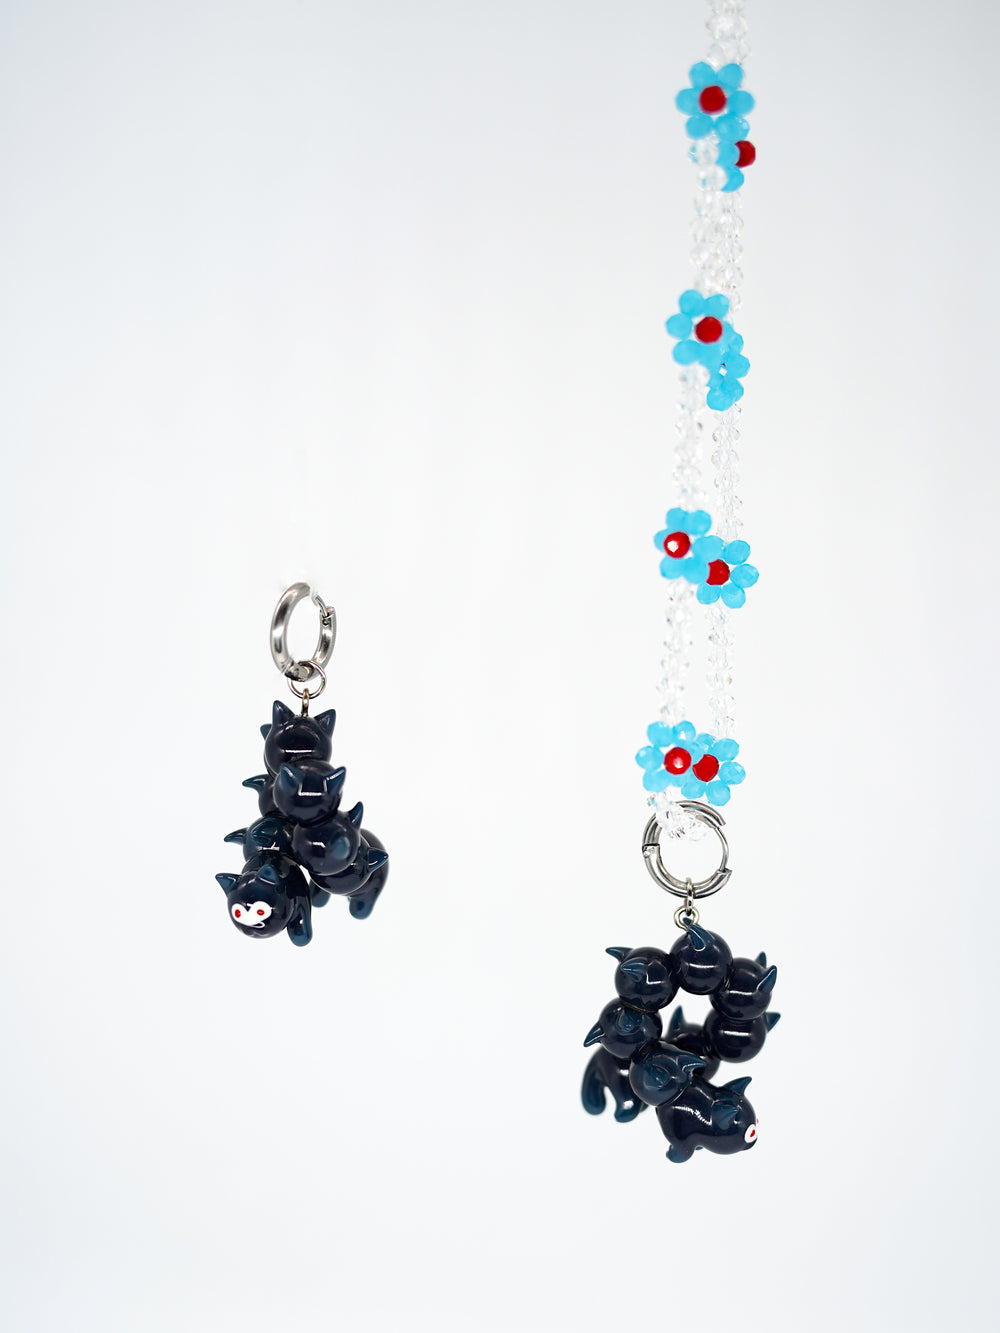 Navy Blue Clown Caterpillar Jewelry, Quirky Earring and Necklace Set, Fun Catcaterpillar Accessories, Unique Ear-Shaped Pendant, Whimsical Insect Jewelry, Colorful Clown Bug Necklace, Earring Dangles with Lots of Ears, Novelty Caterpillar Jewelry Set, Imaginative Critter Necklace, Playful Blue Insect Earrings,